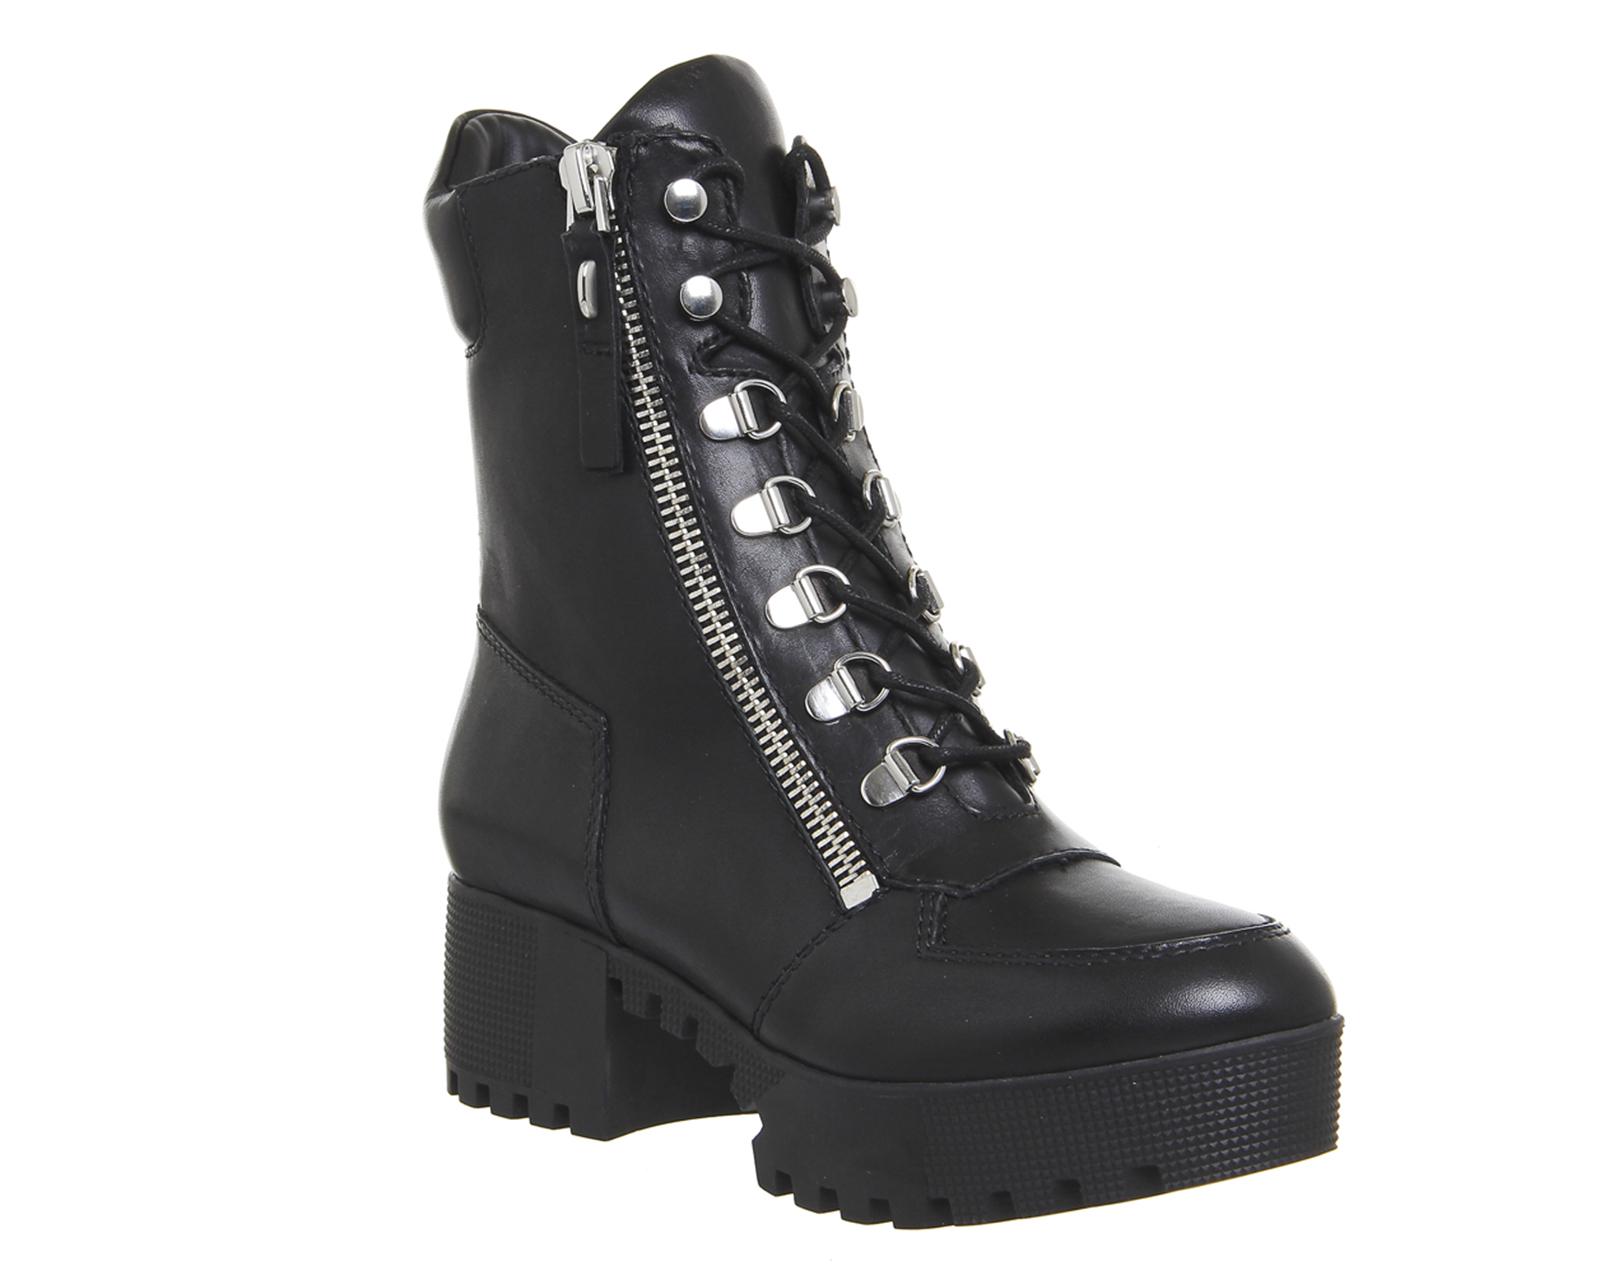 Lyst Kendall + Kylie Phoenix Lace Boots in Black